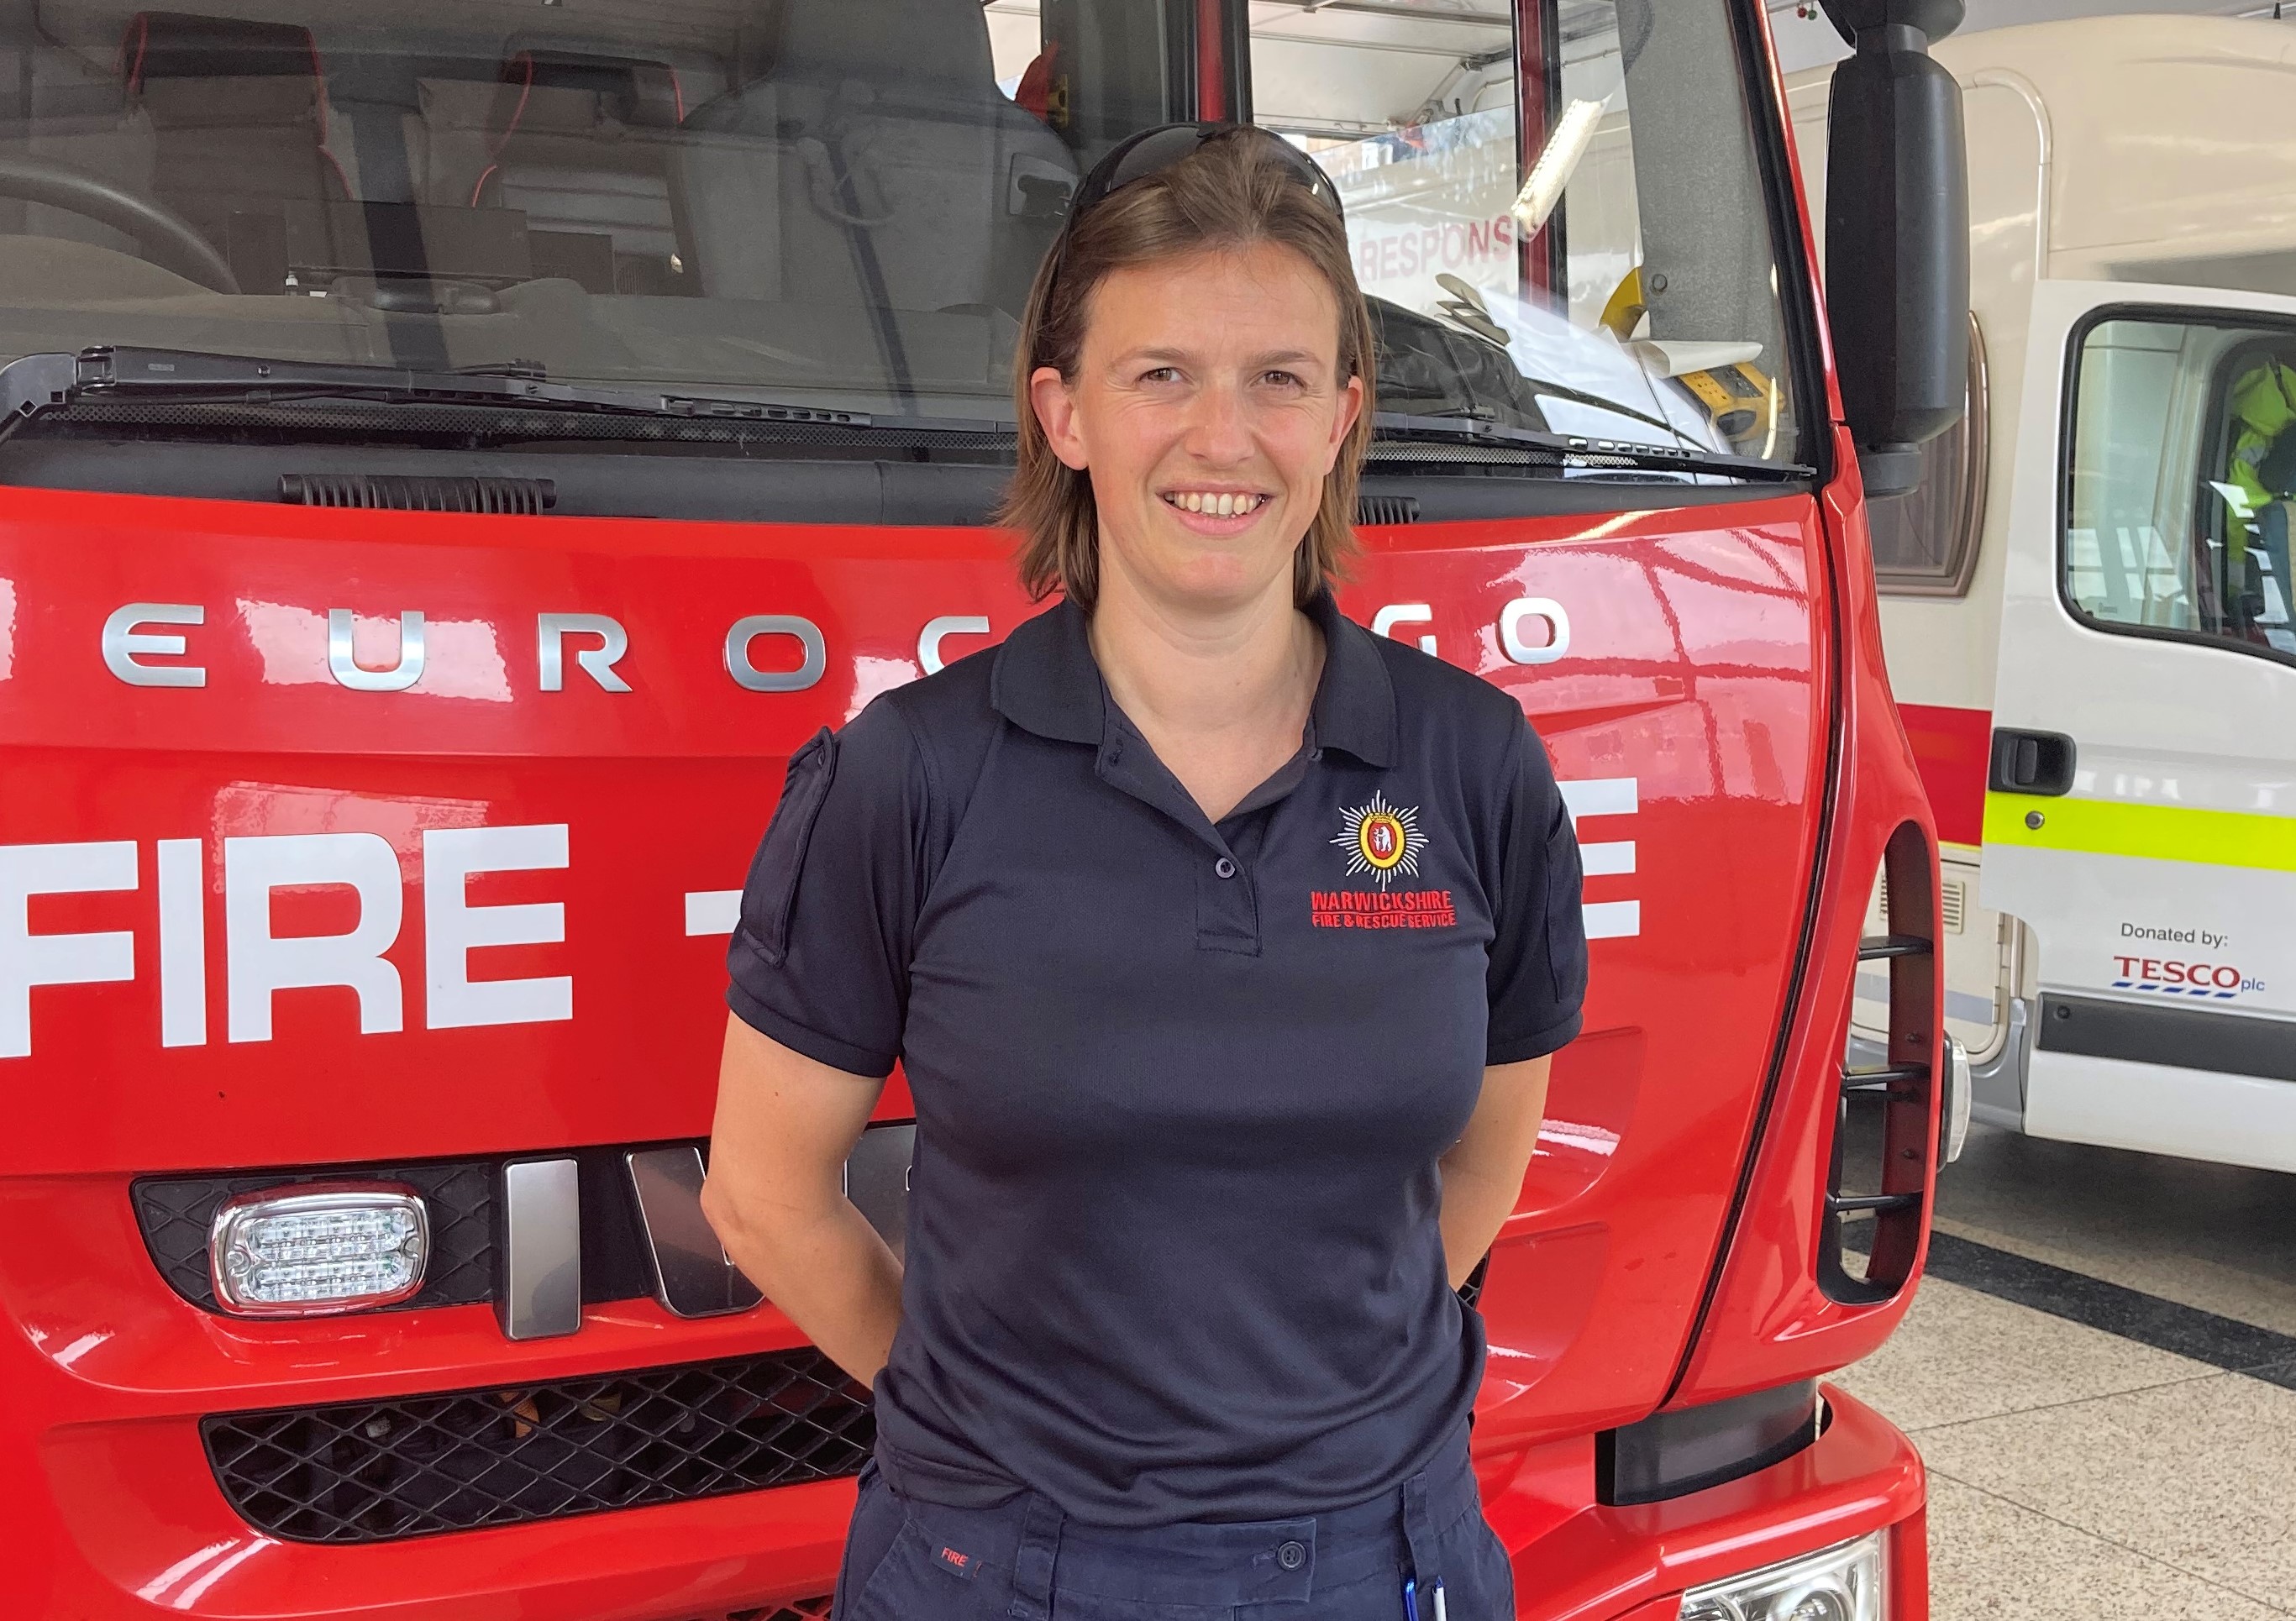 Firefighter Julia Treen in front of fire engine